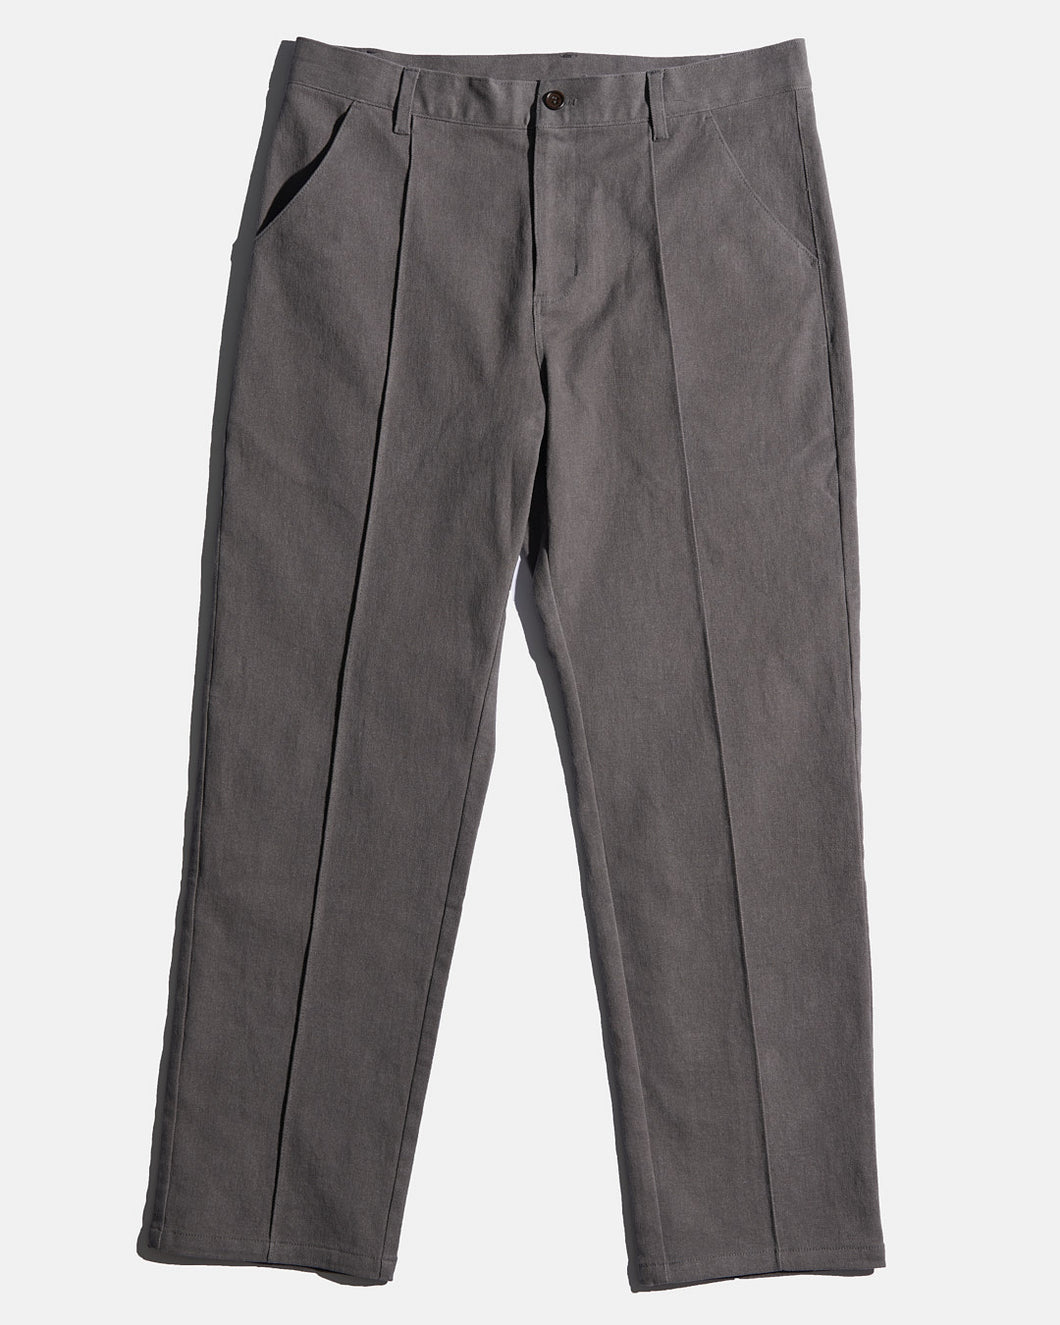 Stitched Crease Work Pant